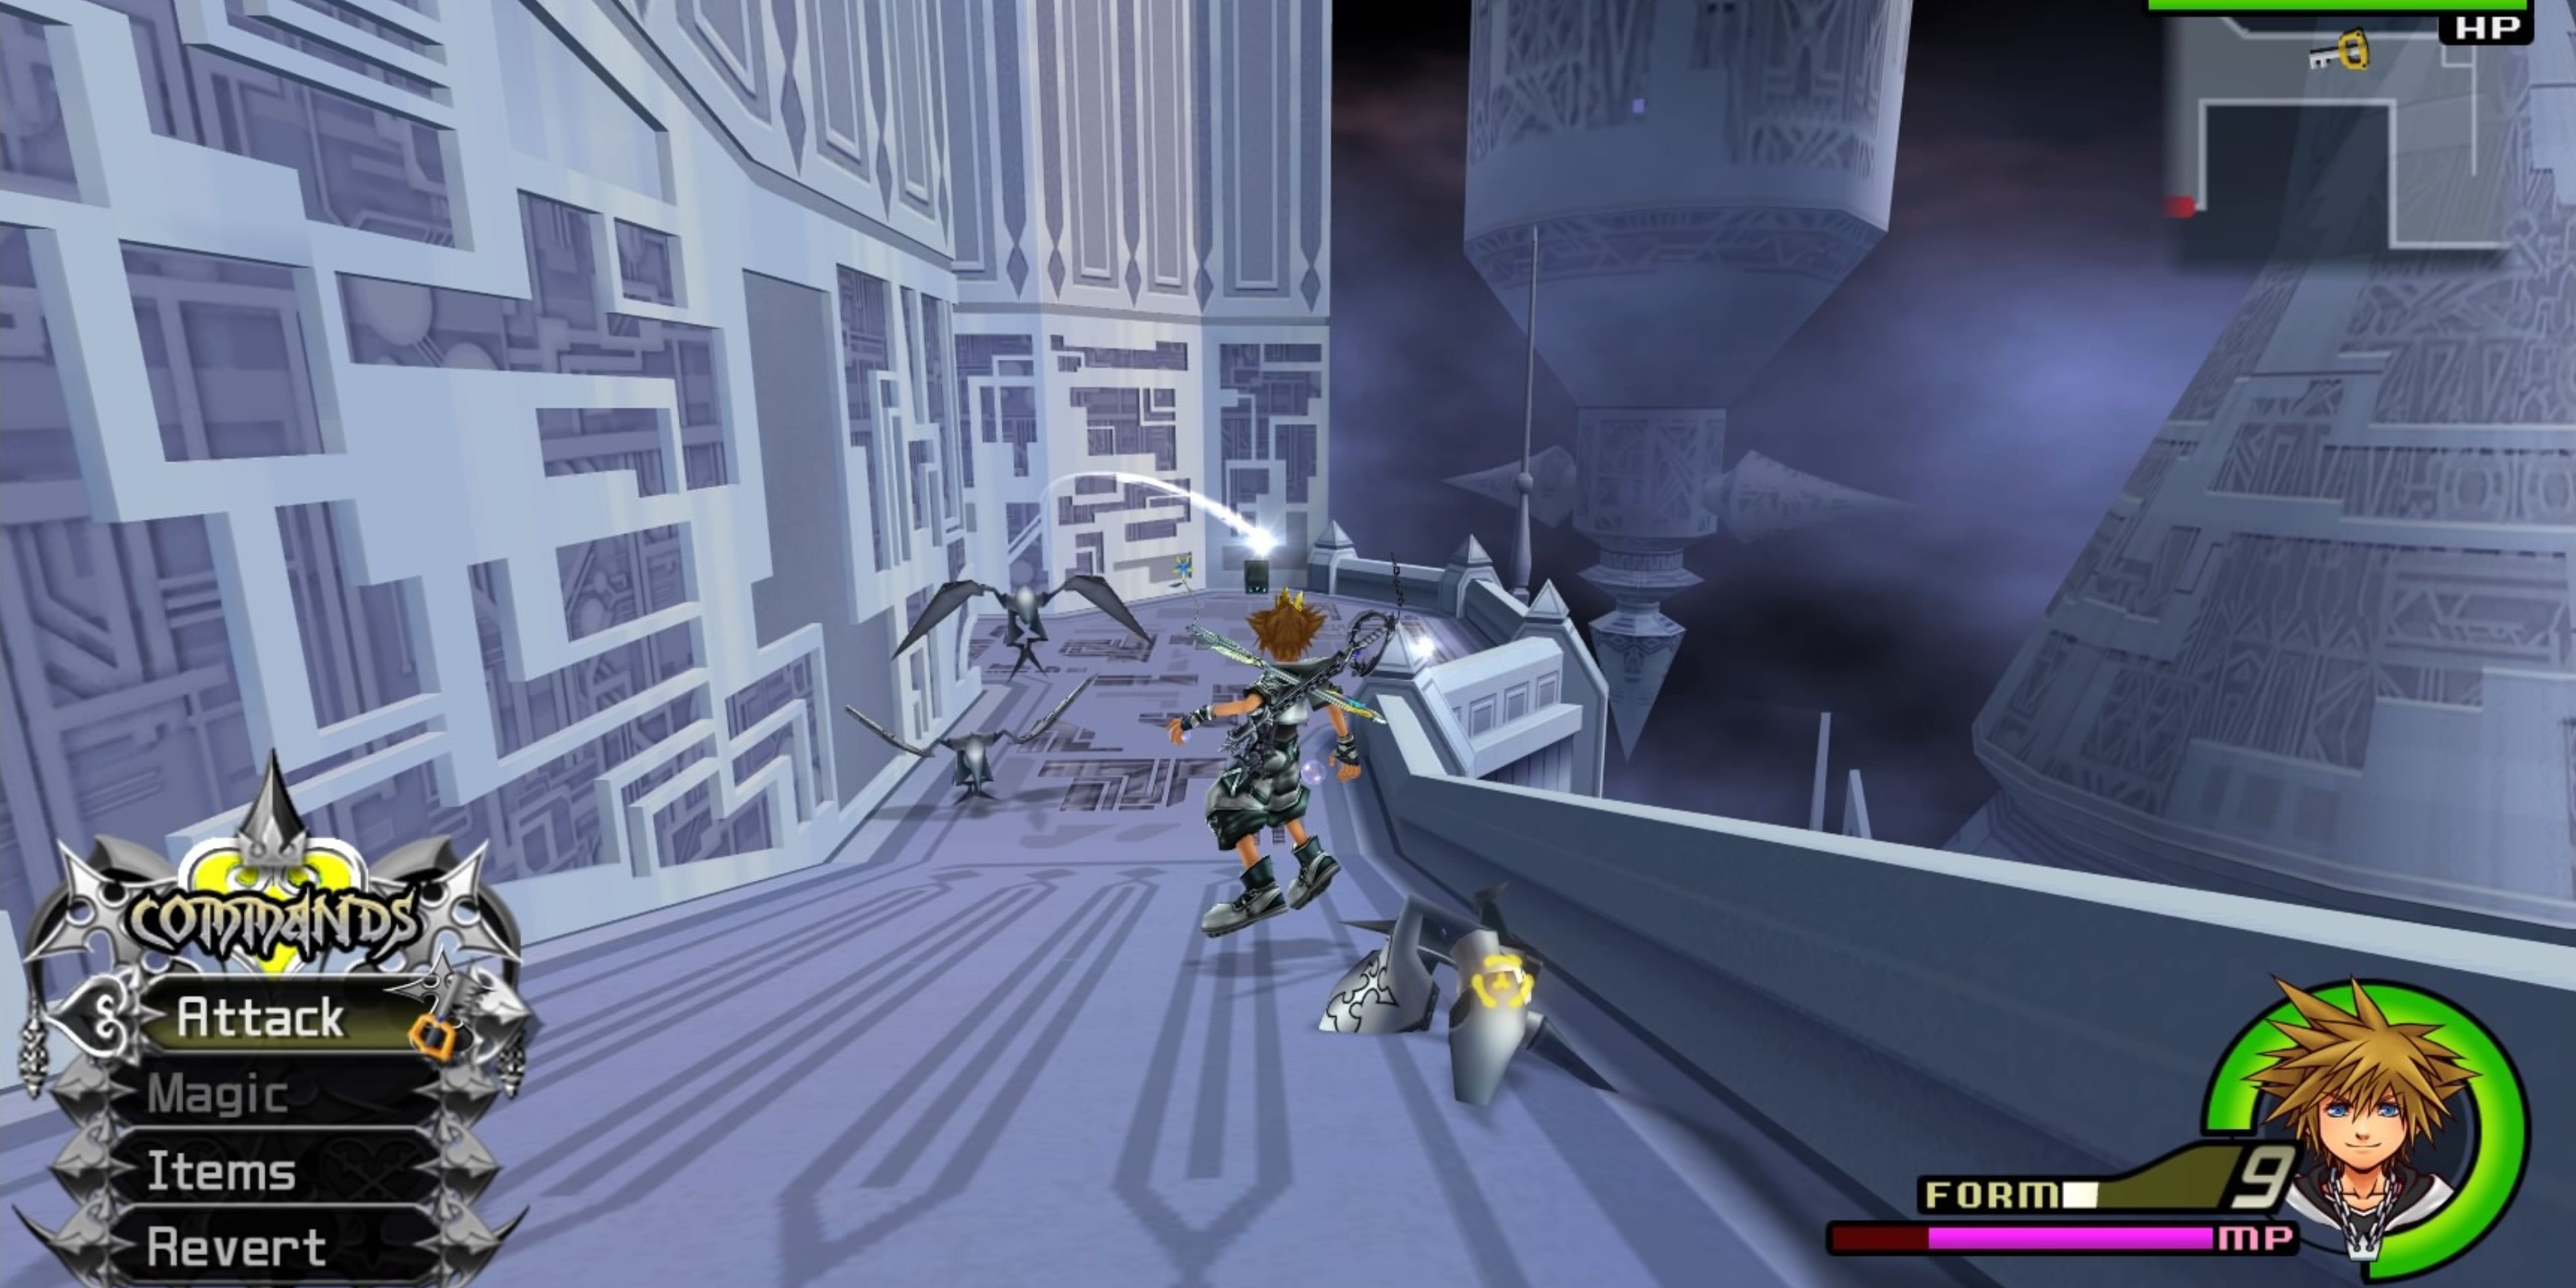 Sora defeats a bunch of Nobodies in his Final Form.